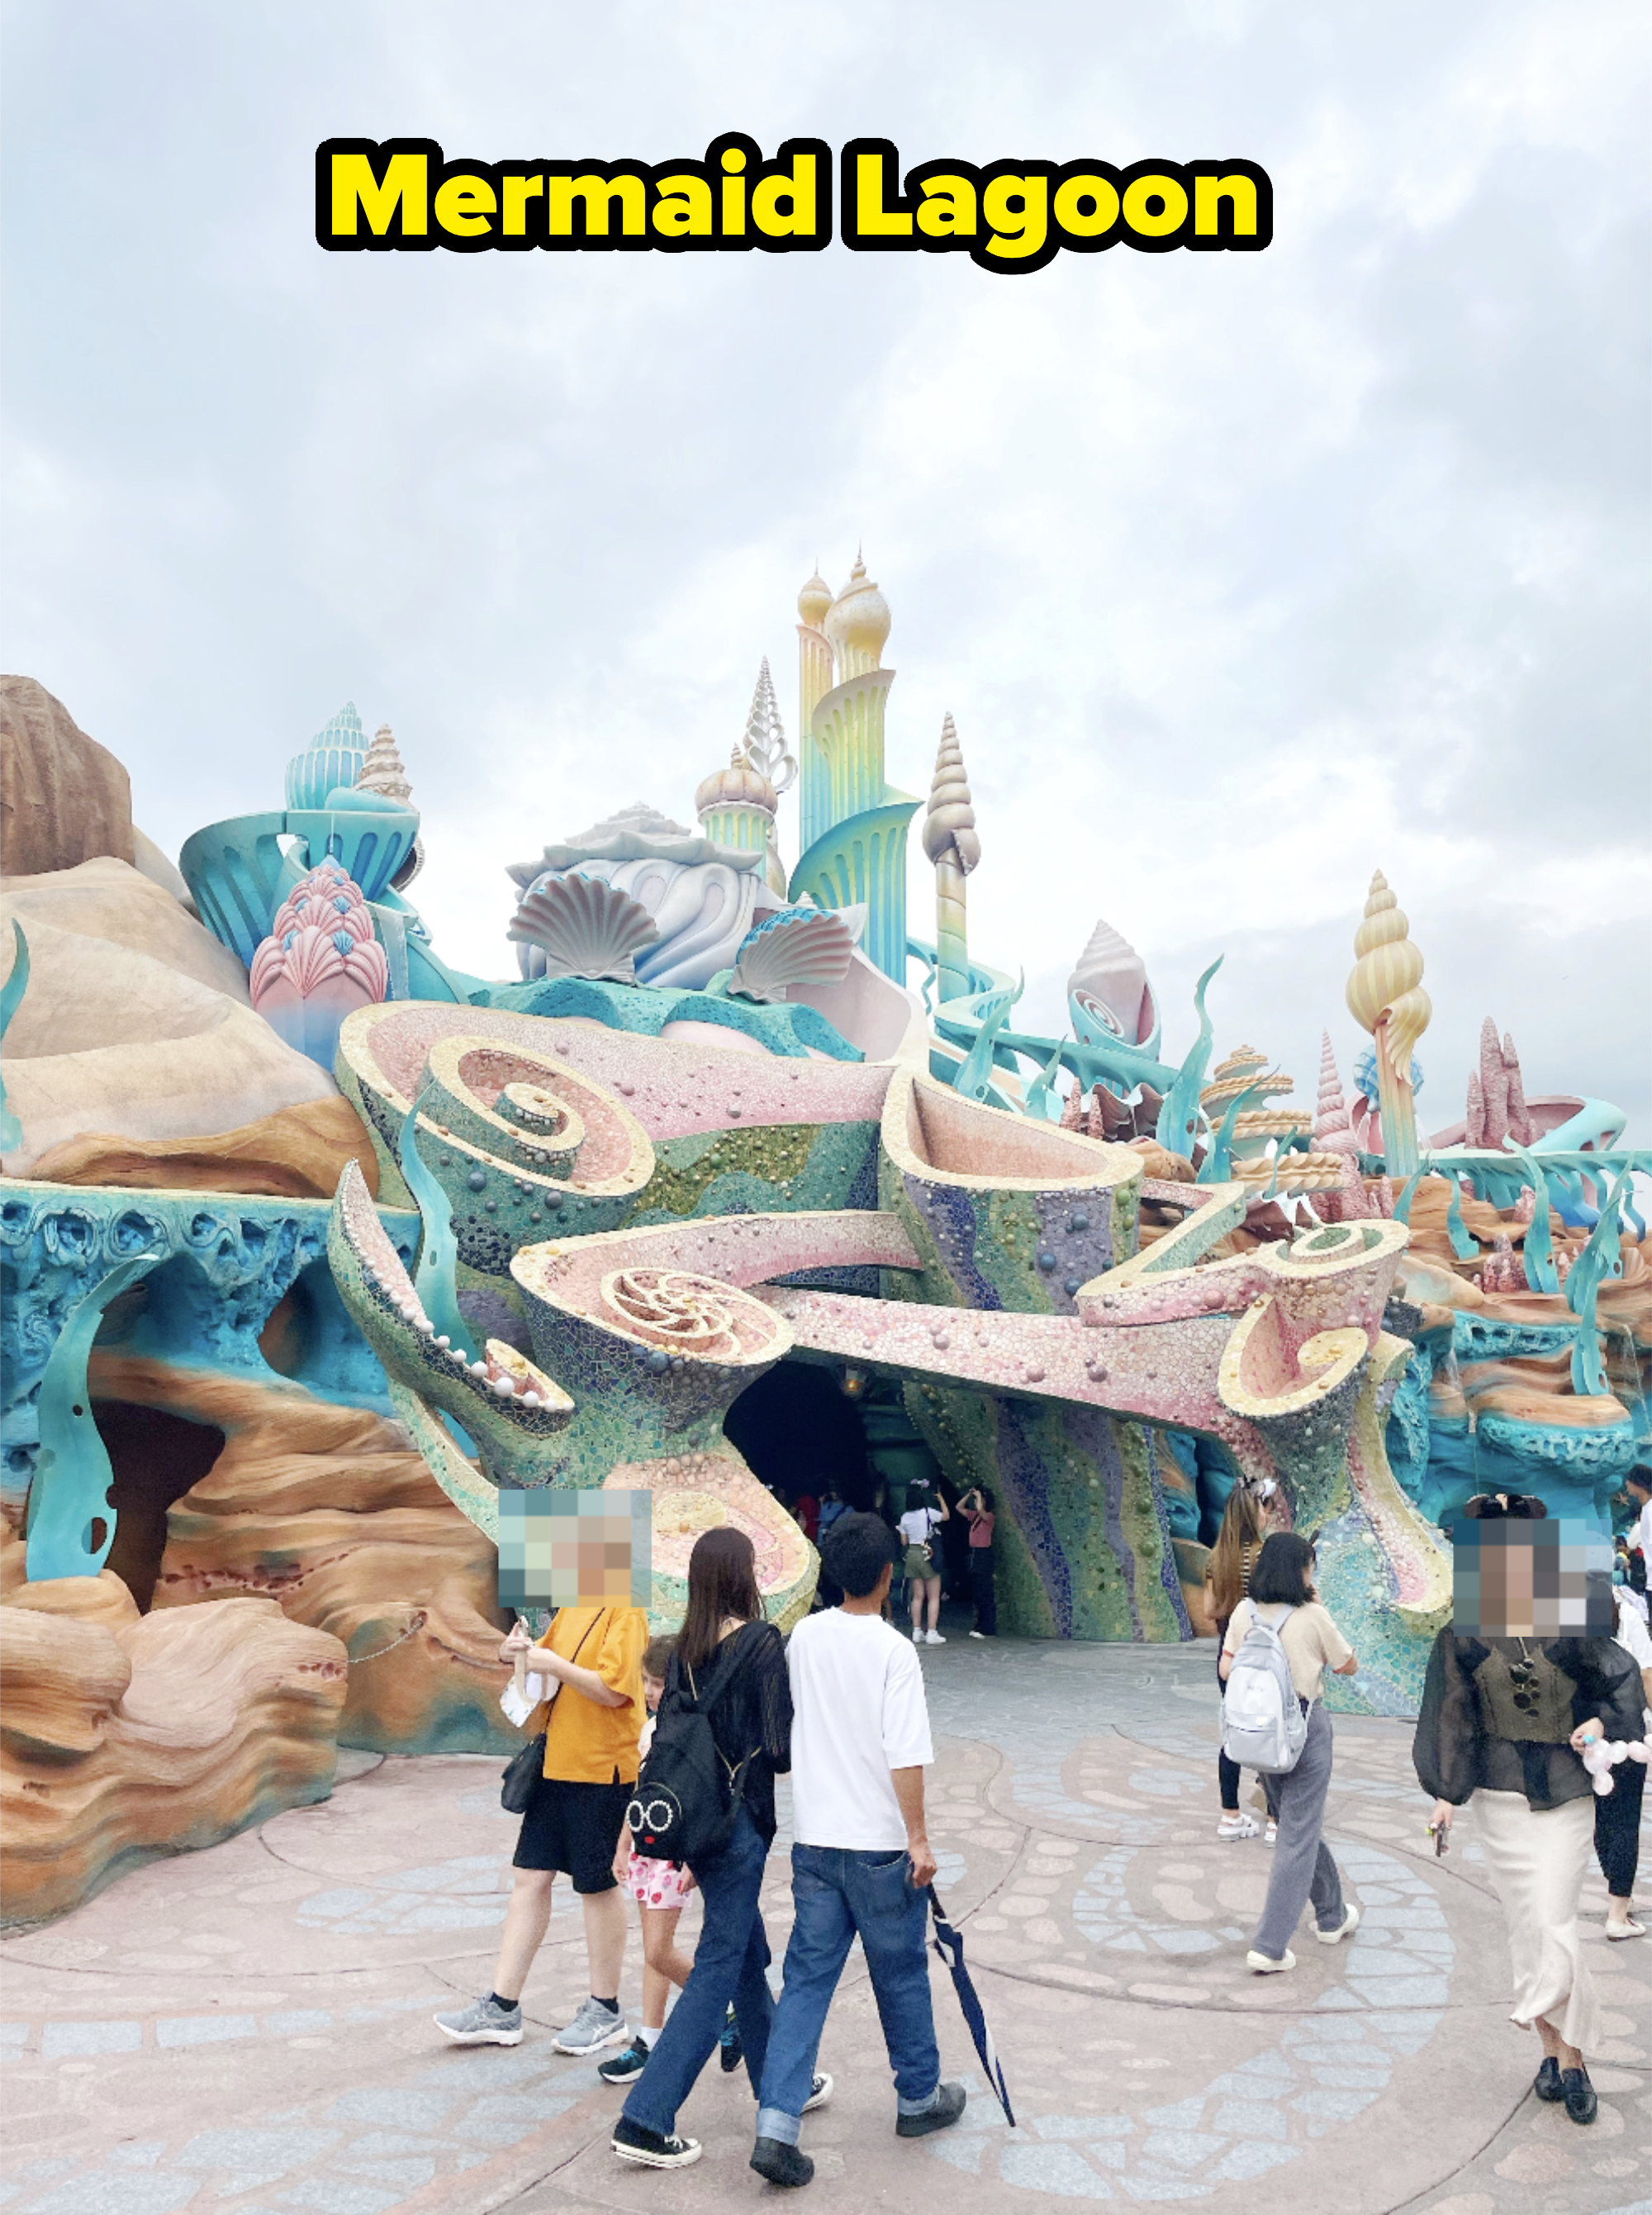 People walk around an imaginative, fantasy-themed Disney amusement park area with whimsical architecture, resembling undersea coral and seashell structures